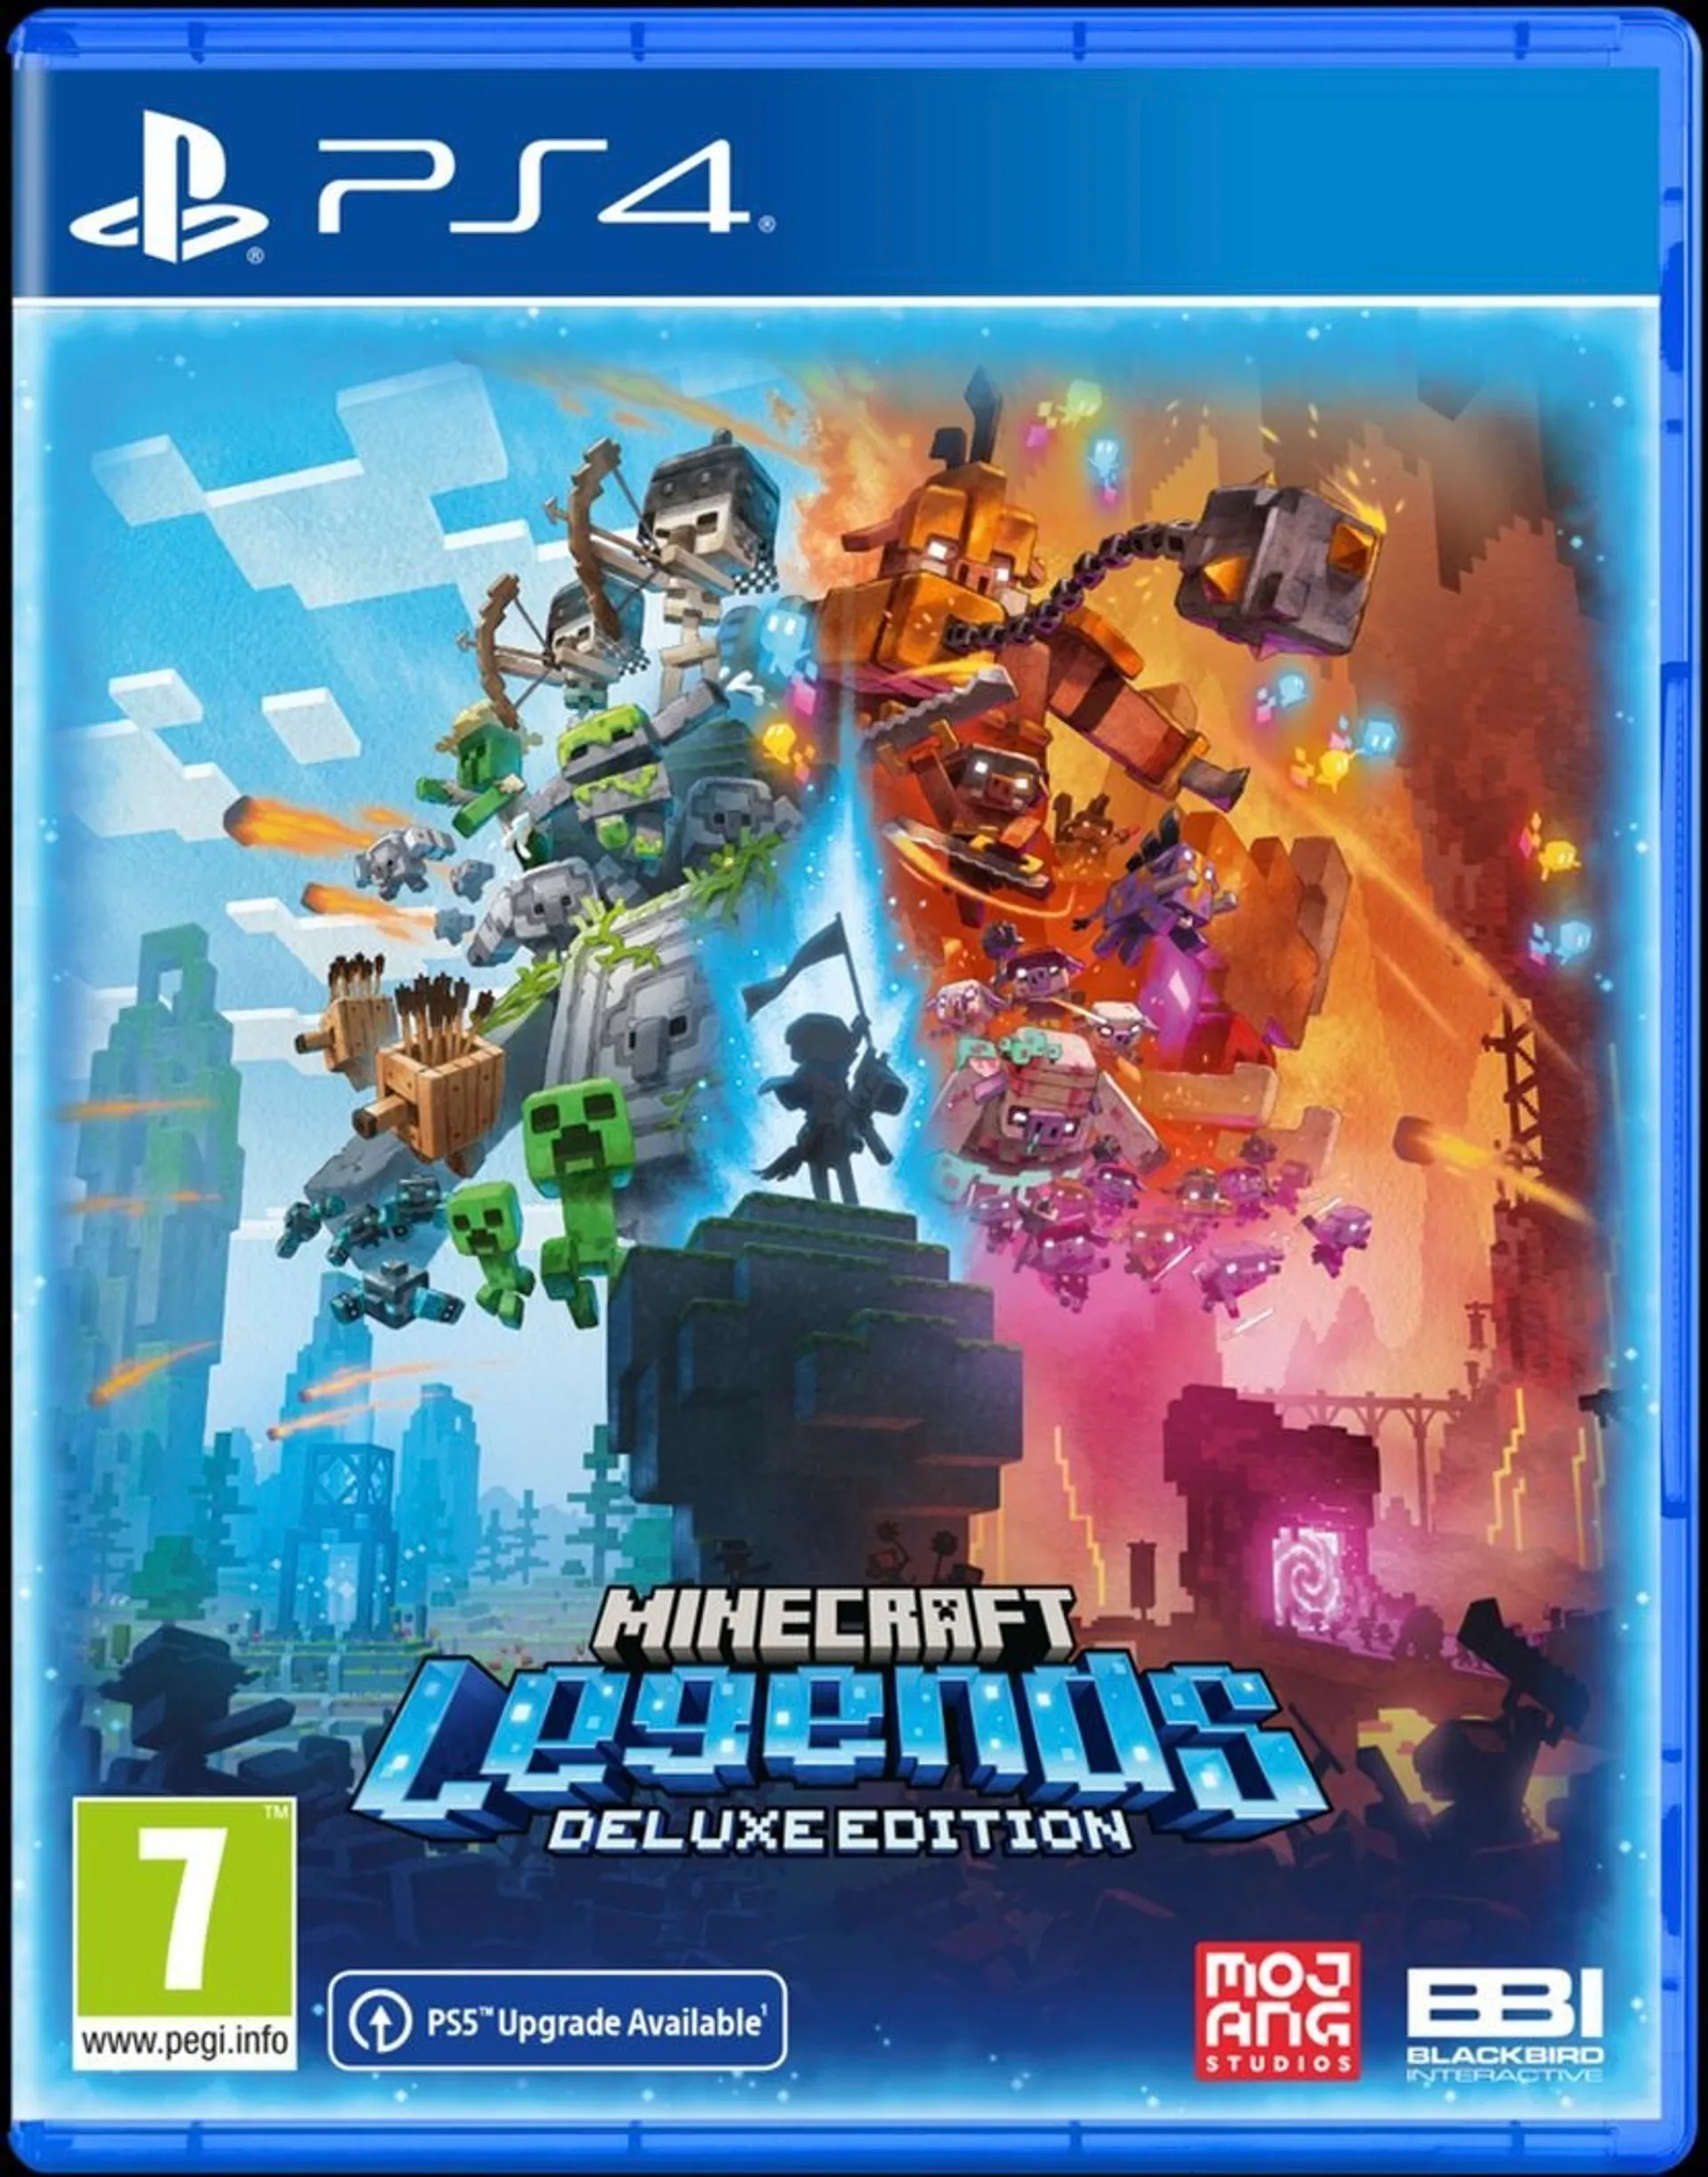 PlayStation 4 Minecraft Legends Deluxe Edition